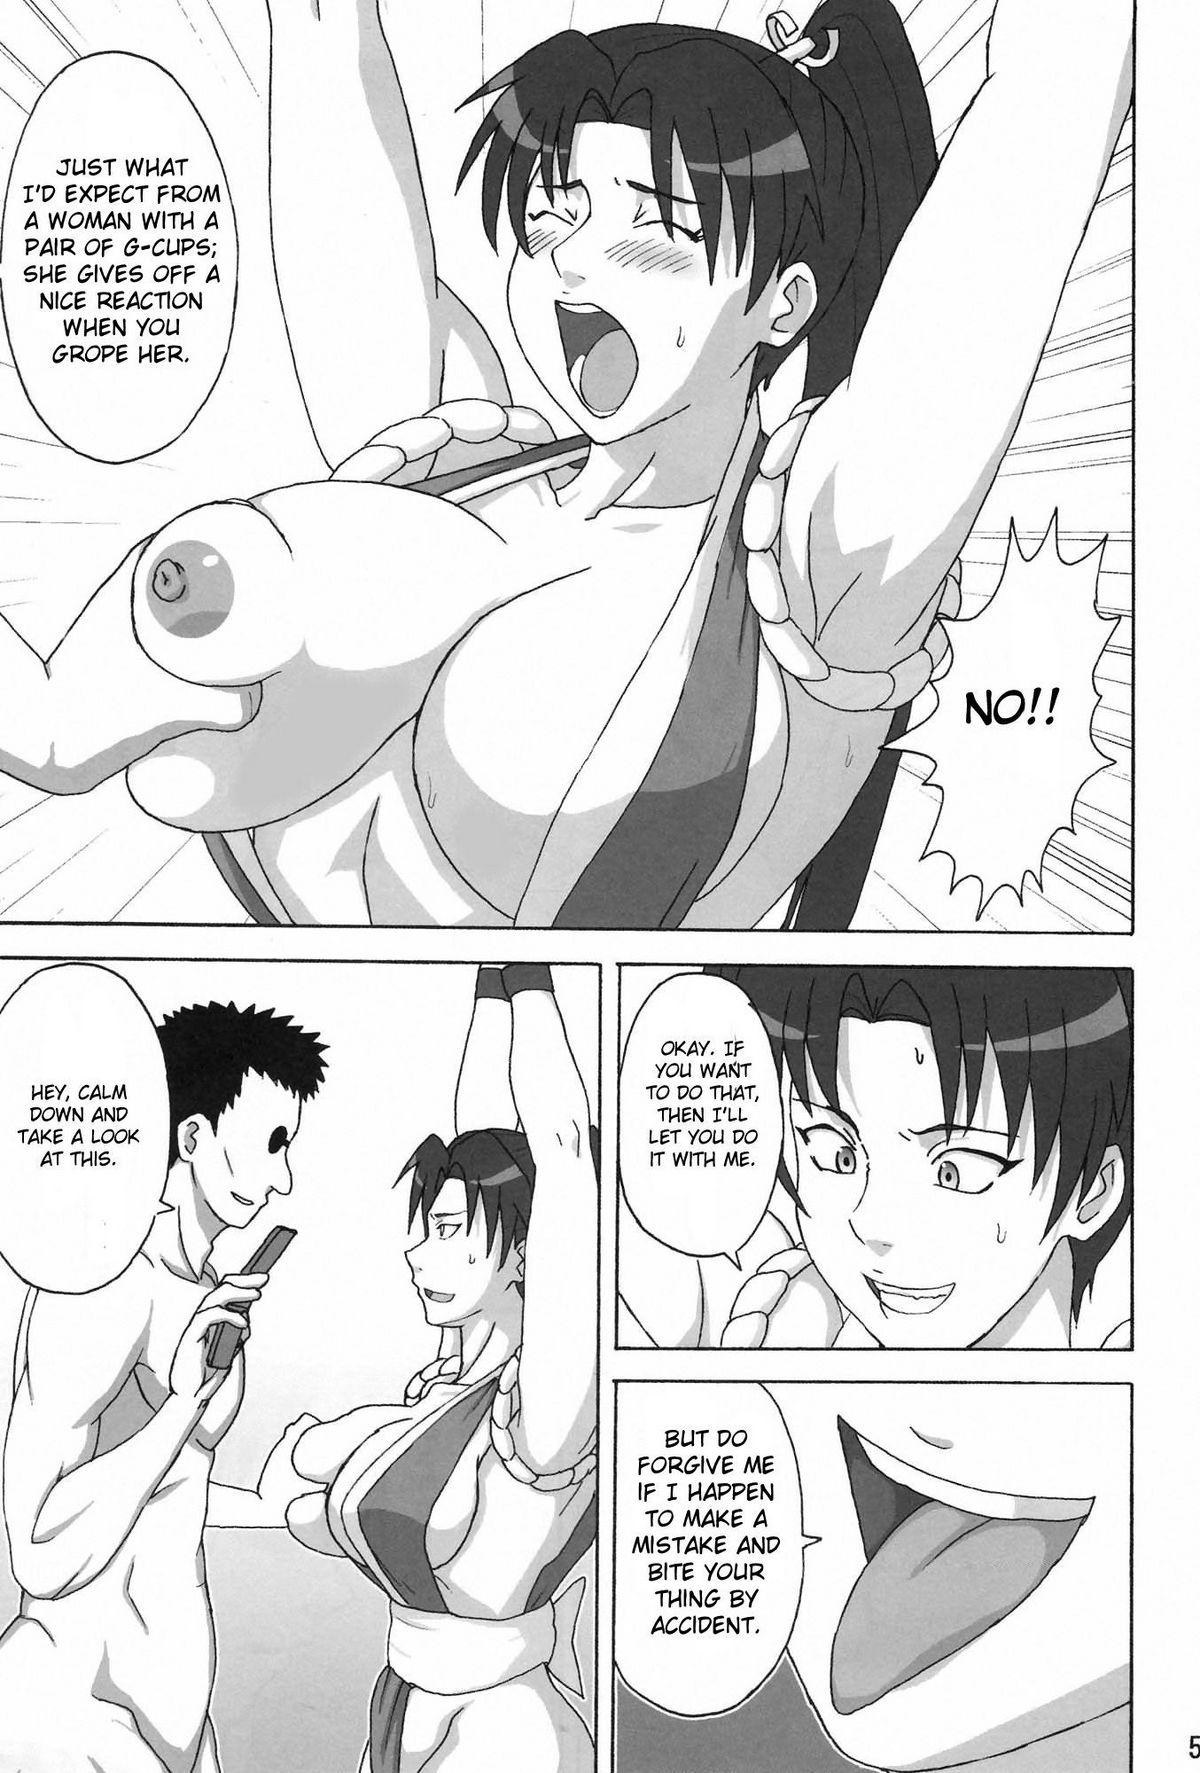 Real Sex Mai x 3 - King of fighters Fatal fury Cfnm - Page 6